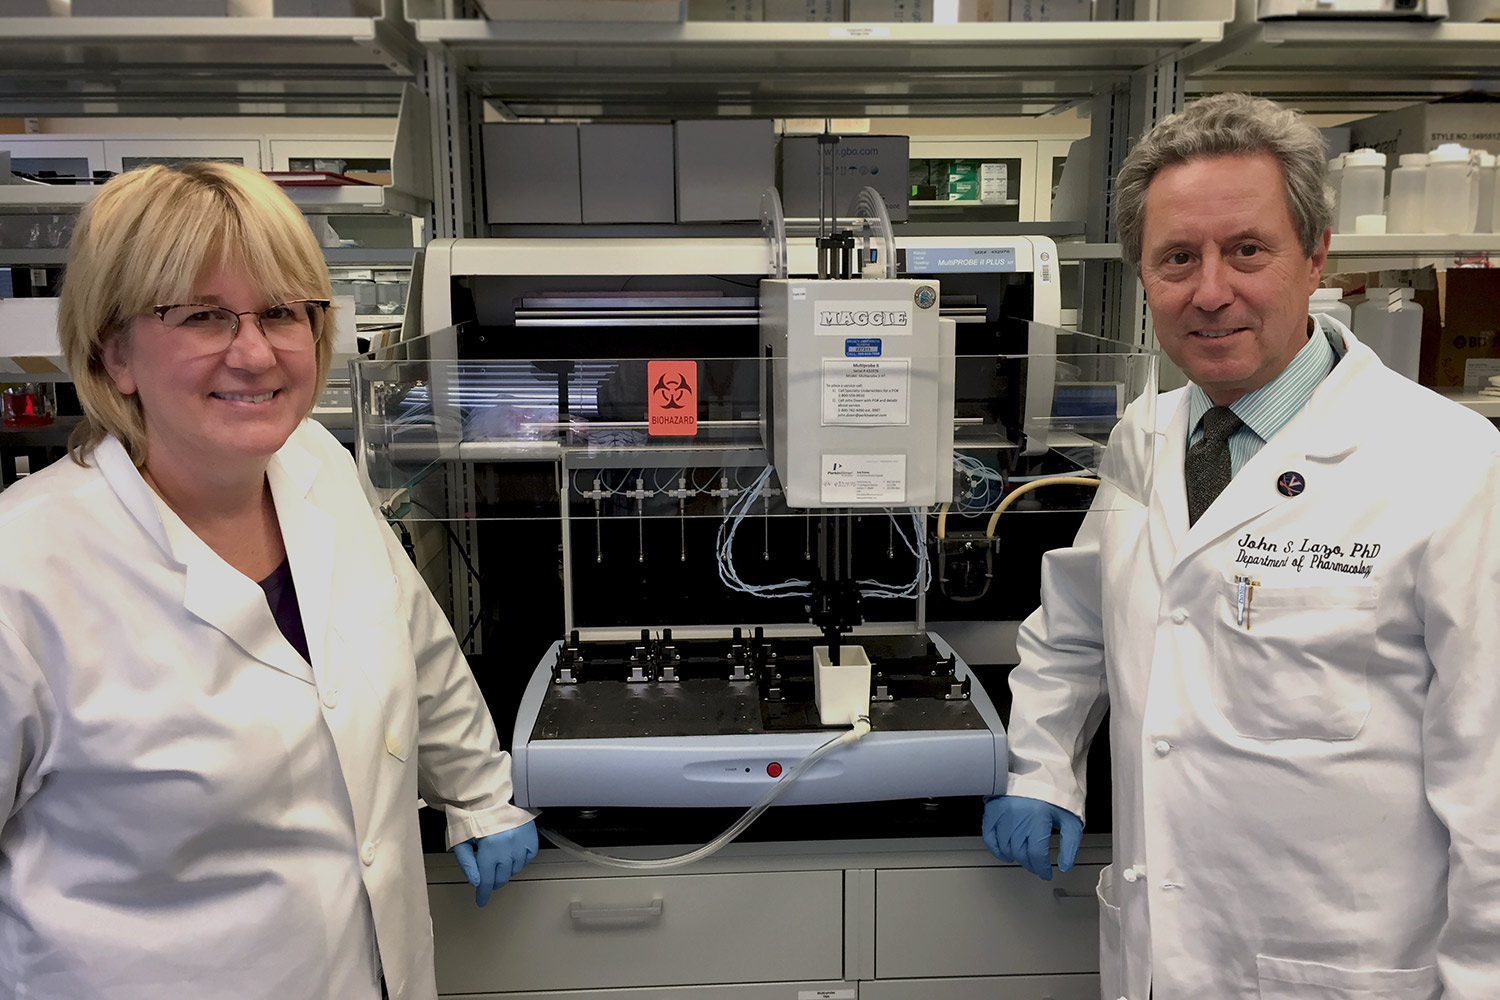 Elizabeth R. Sharlow and John S. Lazo are developing what would be the first antidote to radiation exposure.